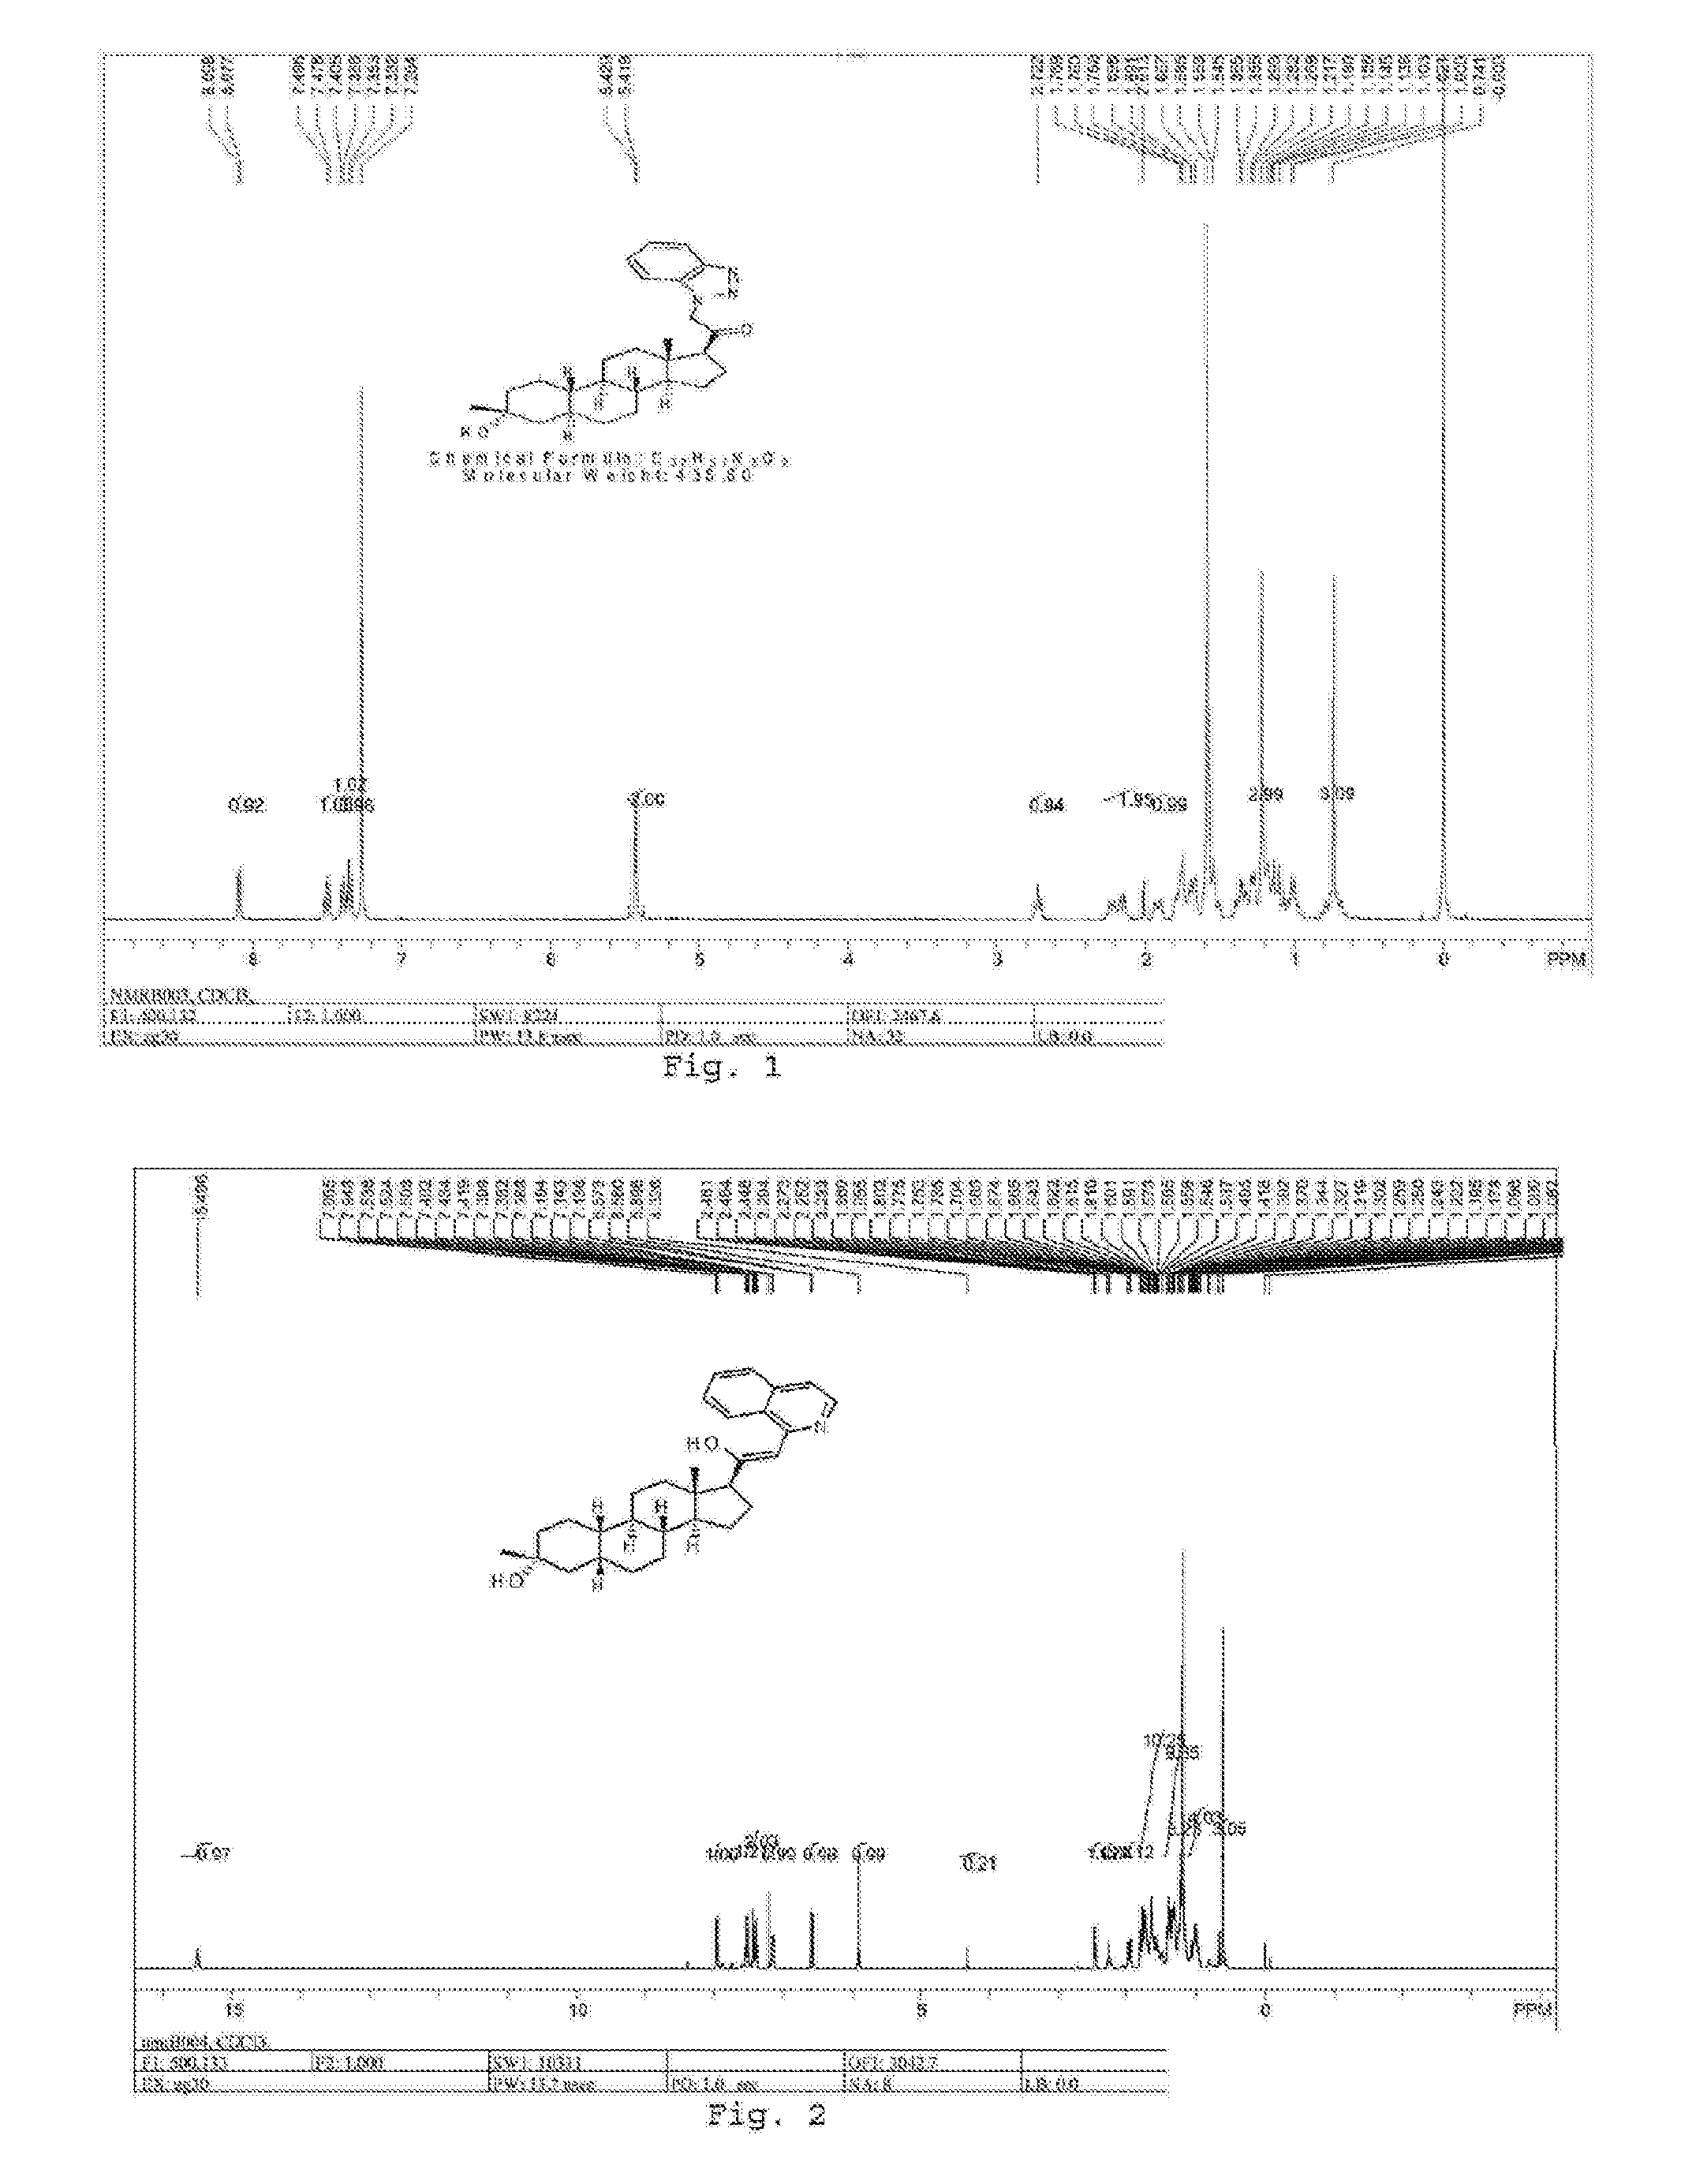 19-NOR neuroactive steroids and methods of use thereof